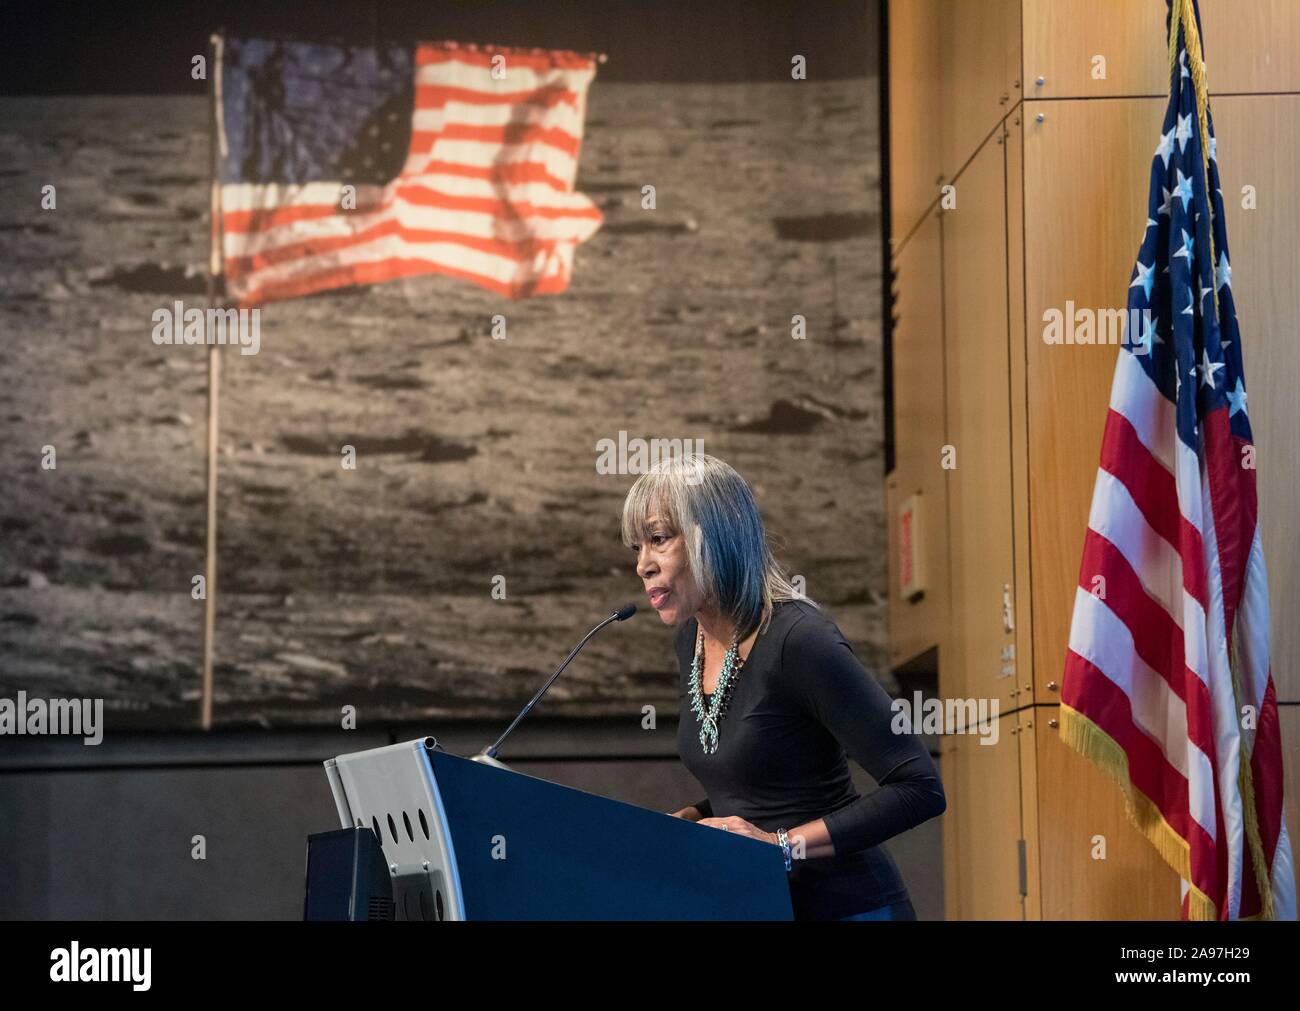 Dr. Phoebe Farris, Powhatan-Pamunkey Tribe, NASA Science Mission Directorate, speaks at a naming ceremony for 2014 MU69, a celestial body discovered by the New Horizons mission and Hubble Space Telescope, at NASA Headquarters November 12, 2019 in Washington, DC. The new name, Arrokoth, means sky in the Algonquian Languages, spoken by the Powhatan tribes. Stock Photo